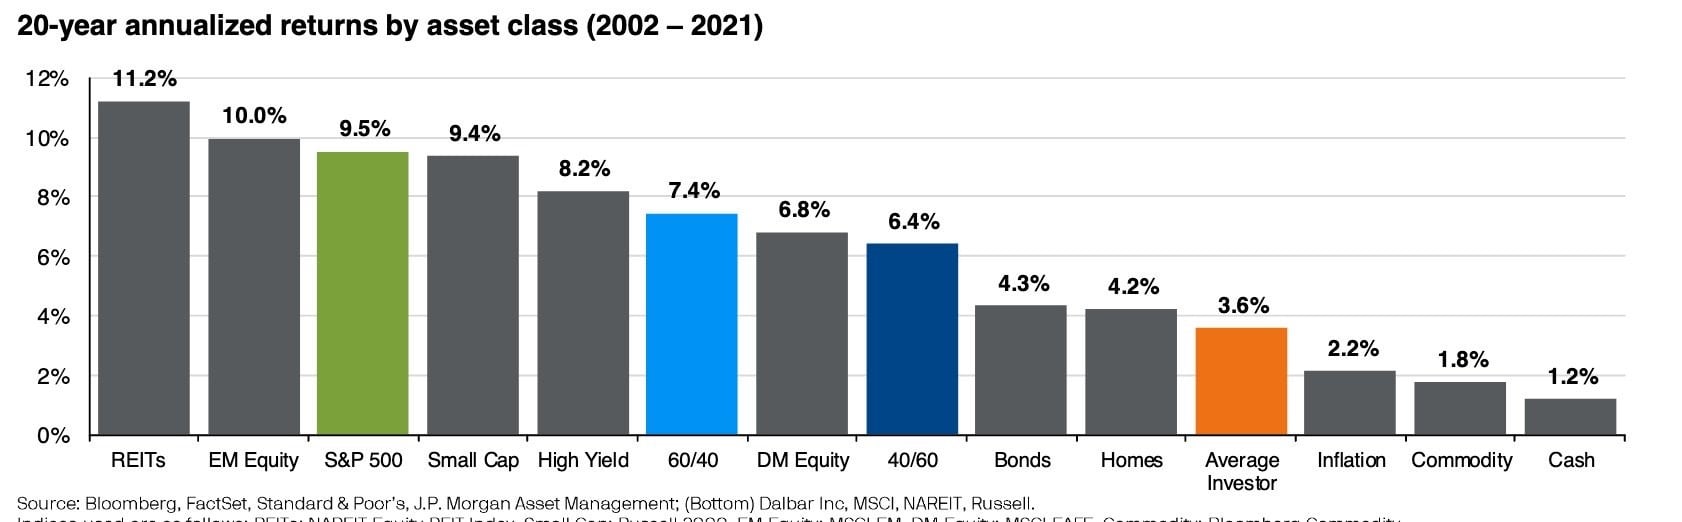 Chart shows the 20-year annualized returns by asset class (2002 - 20212) Some of the topics included: cash, inflation, average investor, bonds, S&P 500